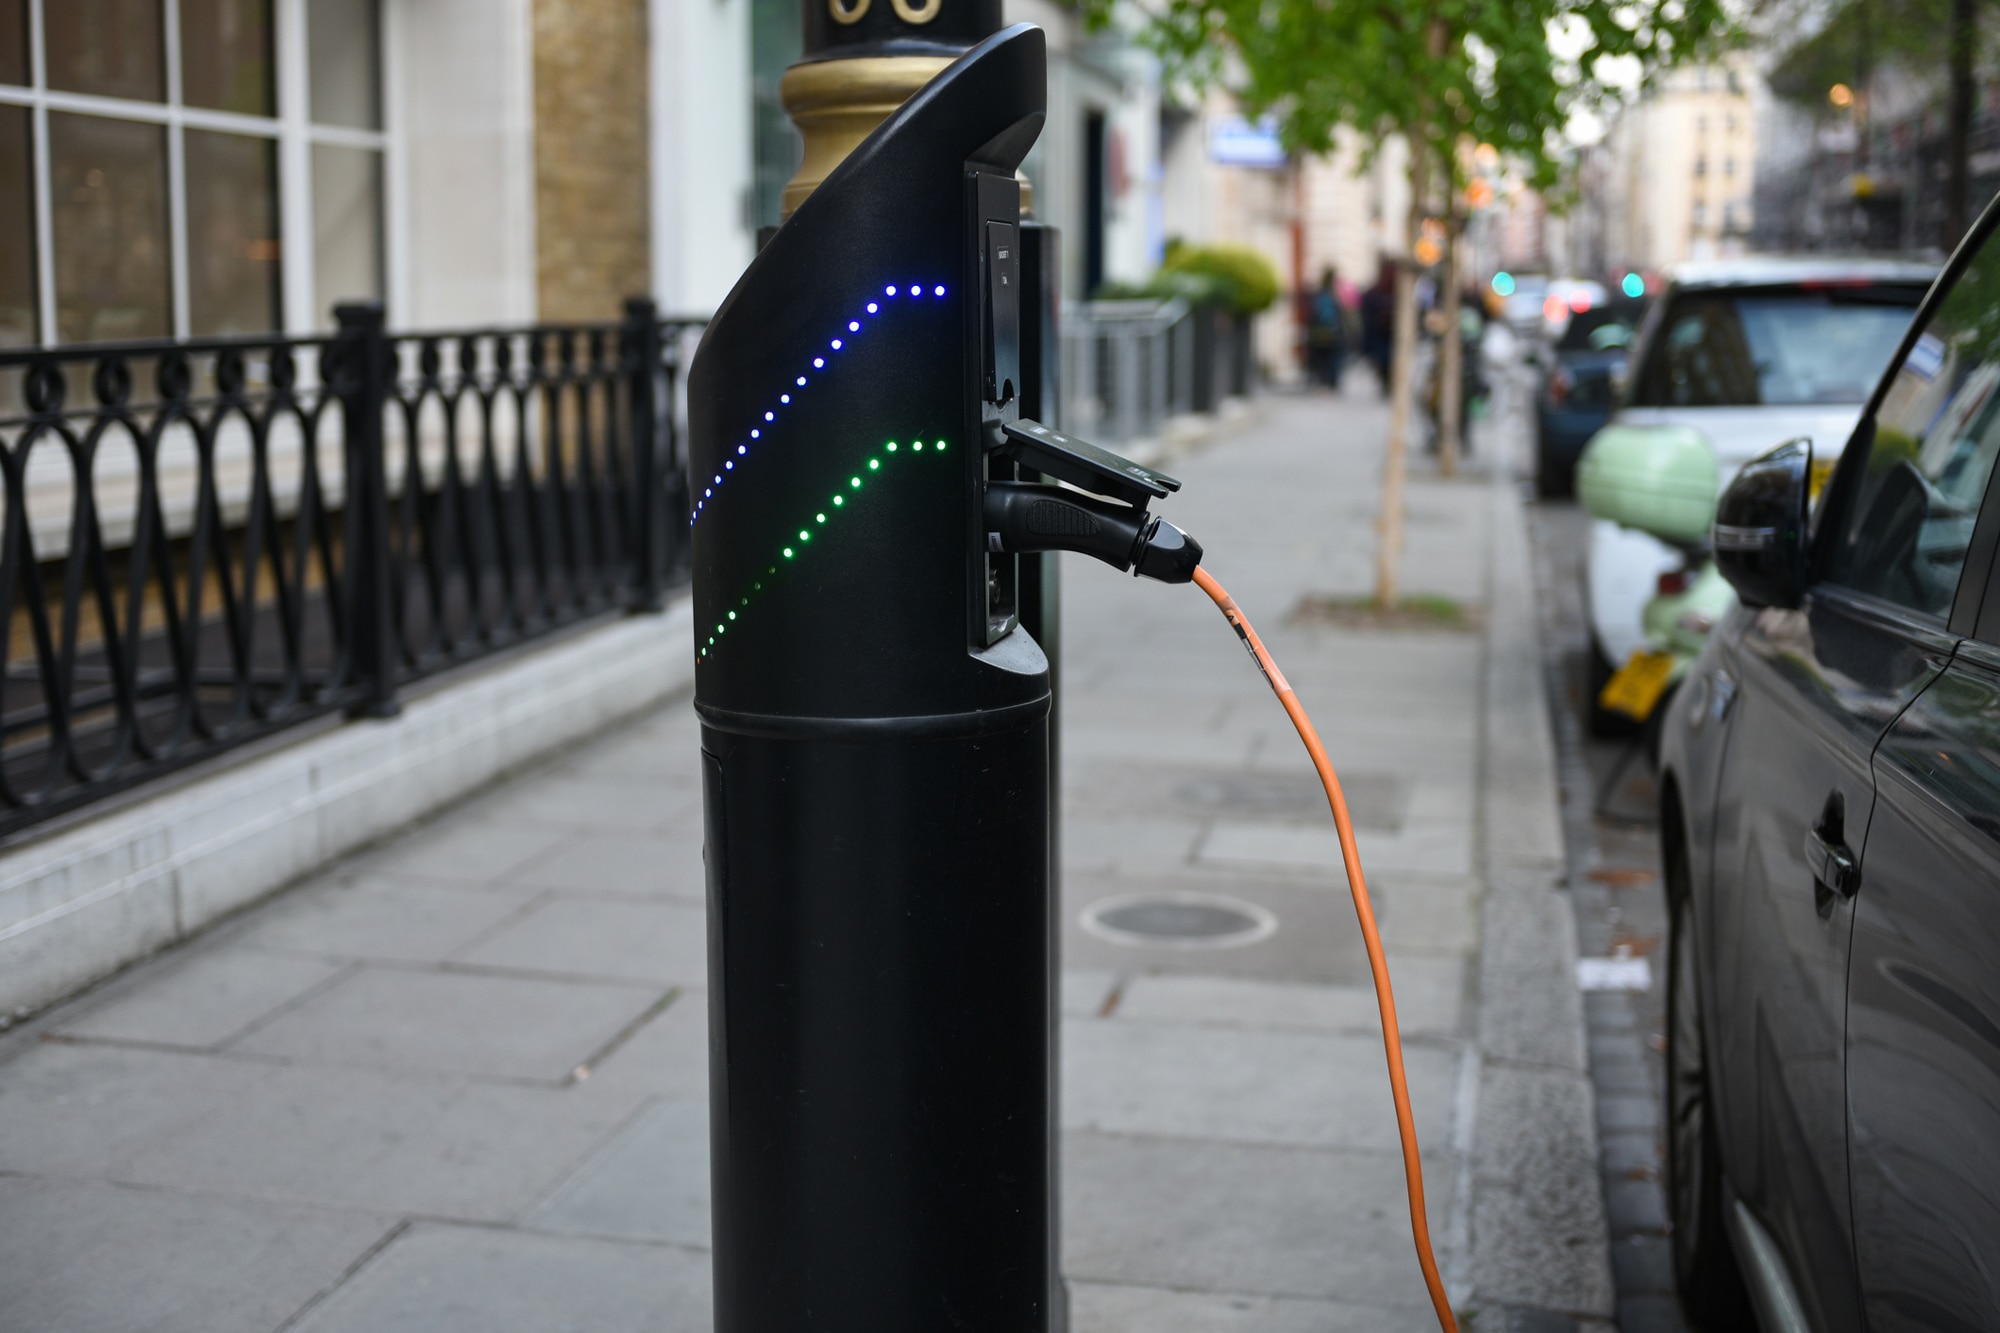 Electric car charging point